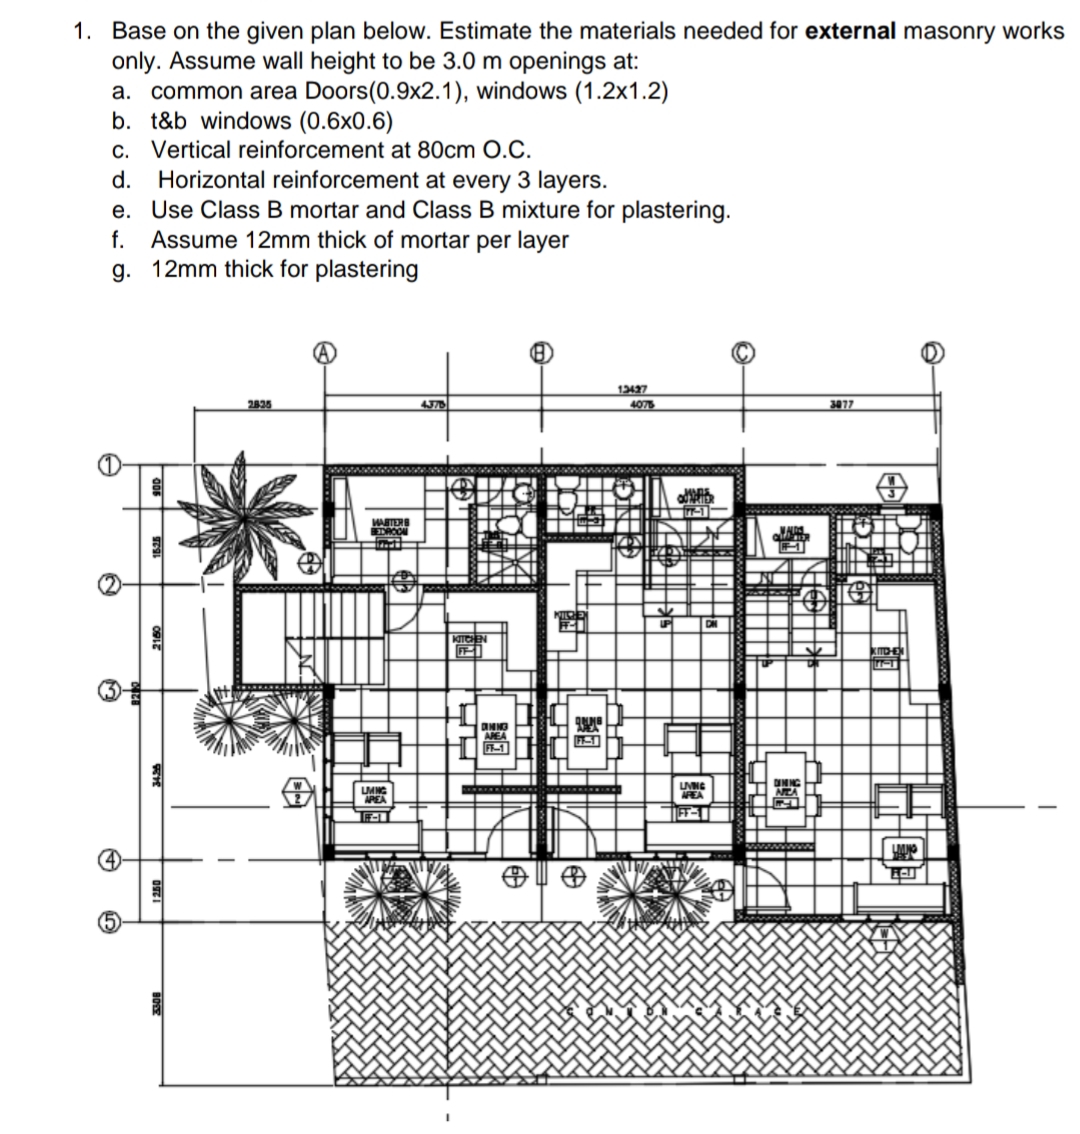 1. Base on the given plan below. Estimate the materials needed for external masonry works
only. Assume wall height to be 3.0 m openings at:
a. common area Doors(0.9x2.1), windows (1.2x1.2)
b. t&b windows (0.6x0.6)
c. Vertical reinforcement at 80cm 0.C.
Horizontal reinforcement at every 3 layers.
e. Use Class B mortar and Class B mixture for plastering.
Assume 12mm thick of mortar per layer
g. 12mm thick for plastering
d.
f.
13427
2835
4076
3077
WASTERS
KITCHE
APEA
UMNG
APEA
UMNG
FEA
MEA
